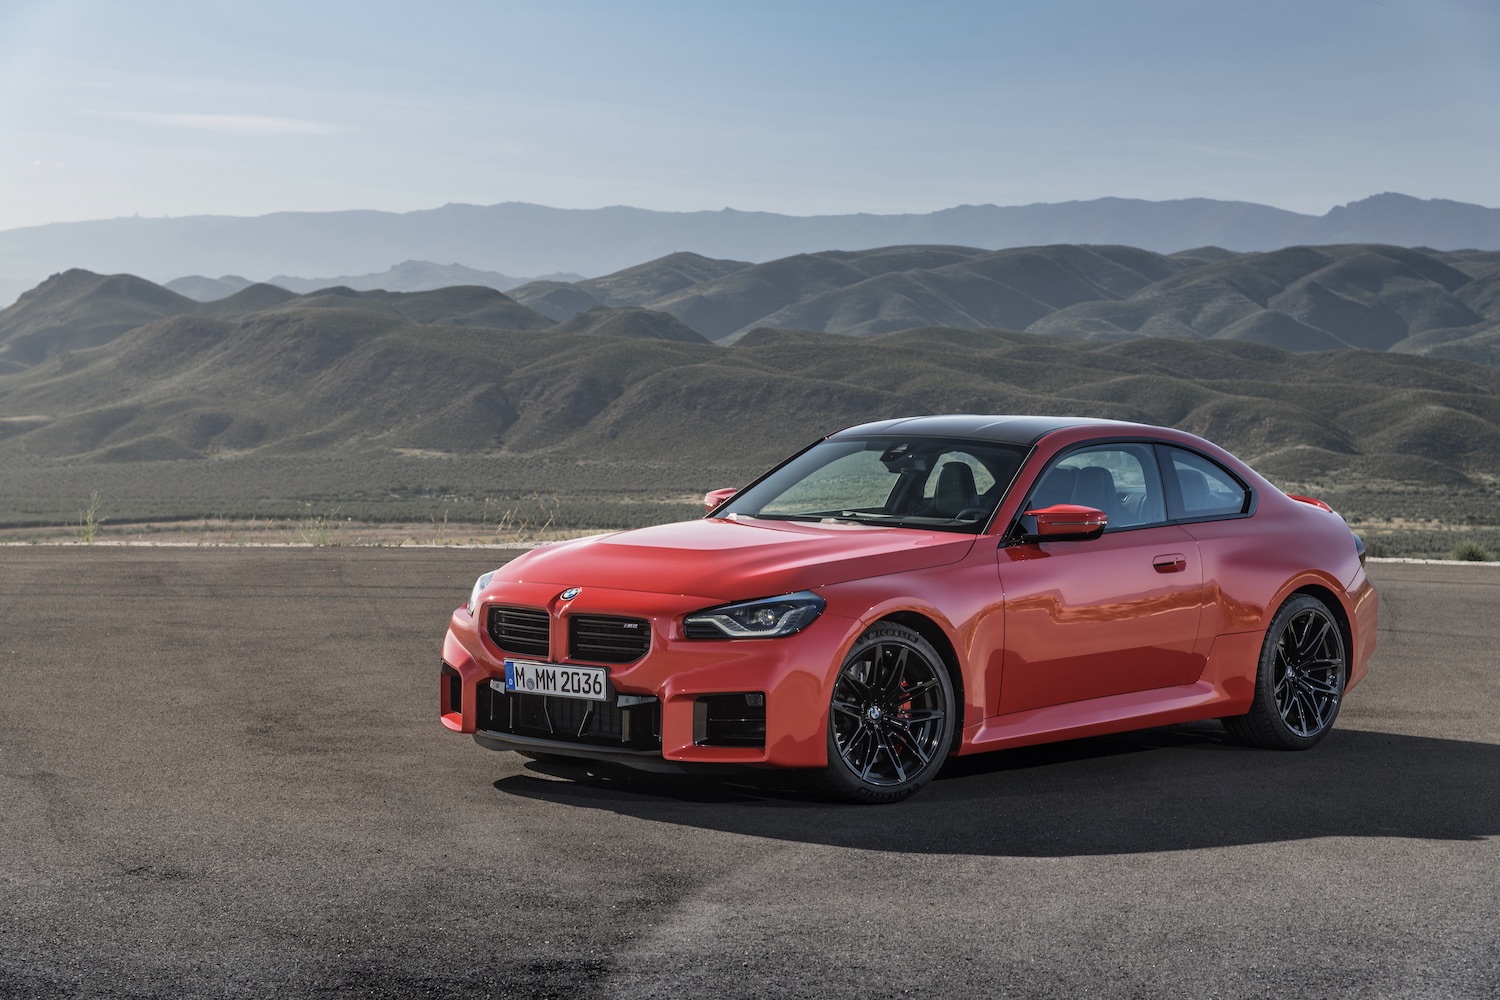 2023 BMW M2 front end angle from the driver's side with mountains in the back.